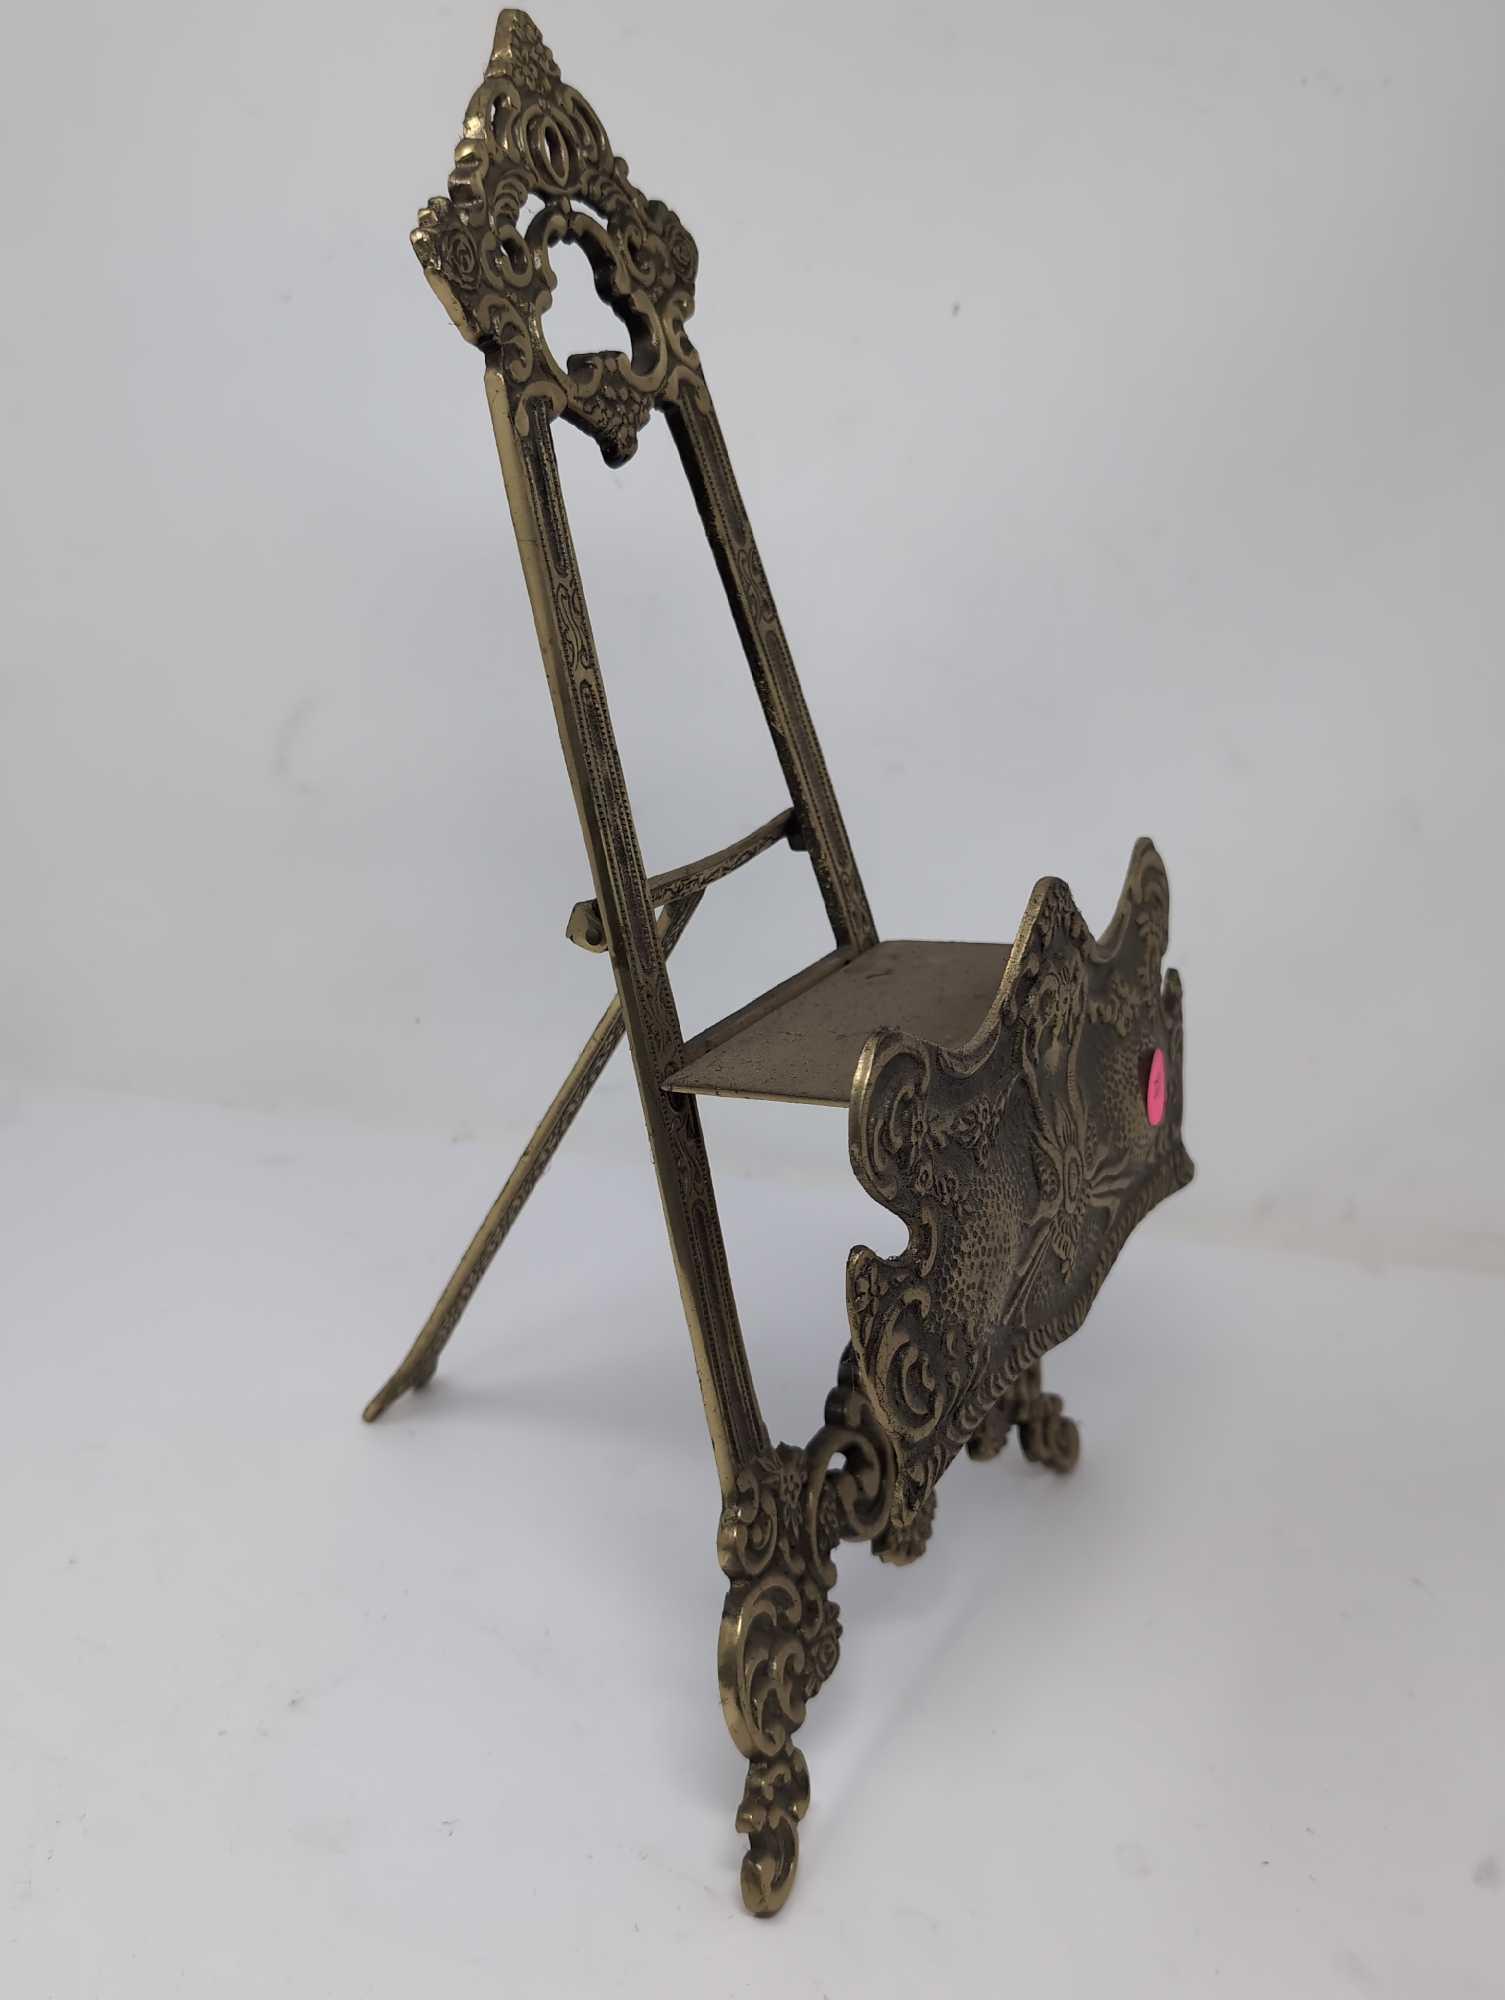 (LR) VINTAGE ORNATE BRASS TABLE TOP EASEL BOOK/PLATE STAND, STAMPED JAPAN. IT MEASURES APPROX. 8"W X